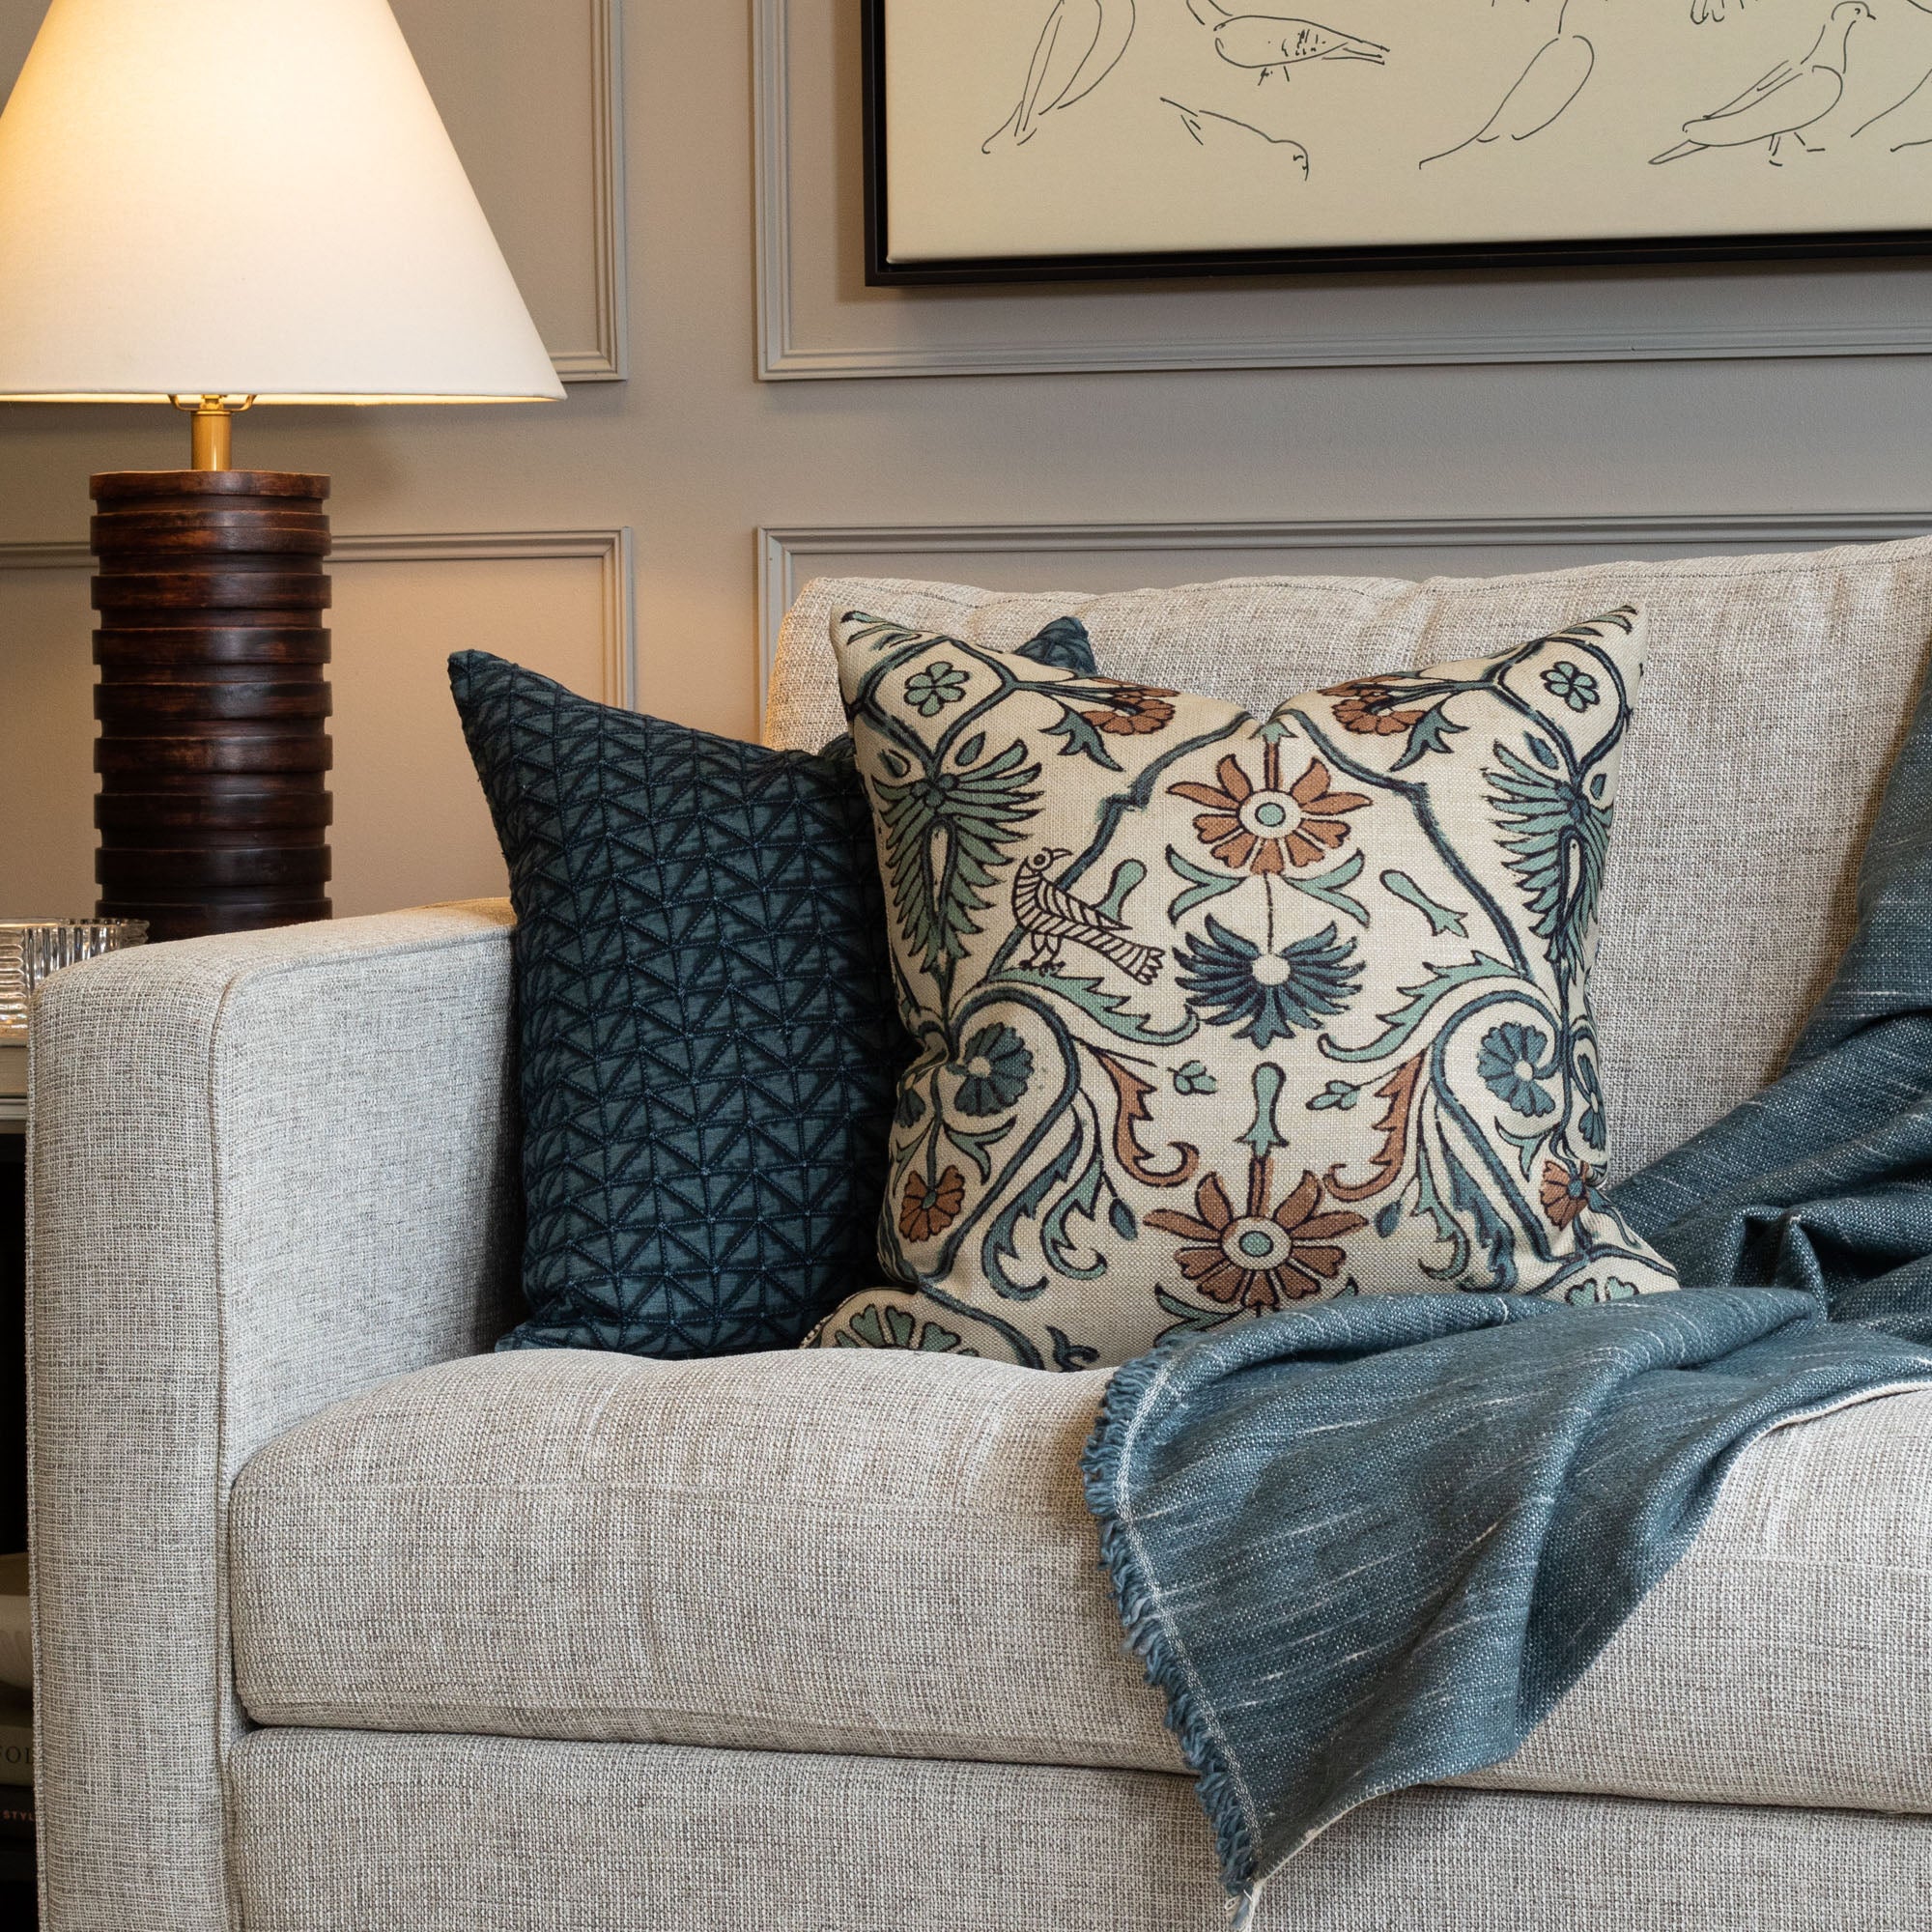 Earthy deep blue, brown and tan designer decorative pillows from Tonic living 